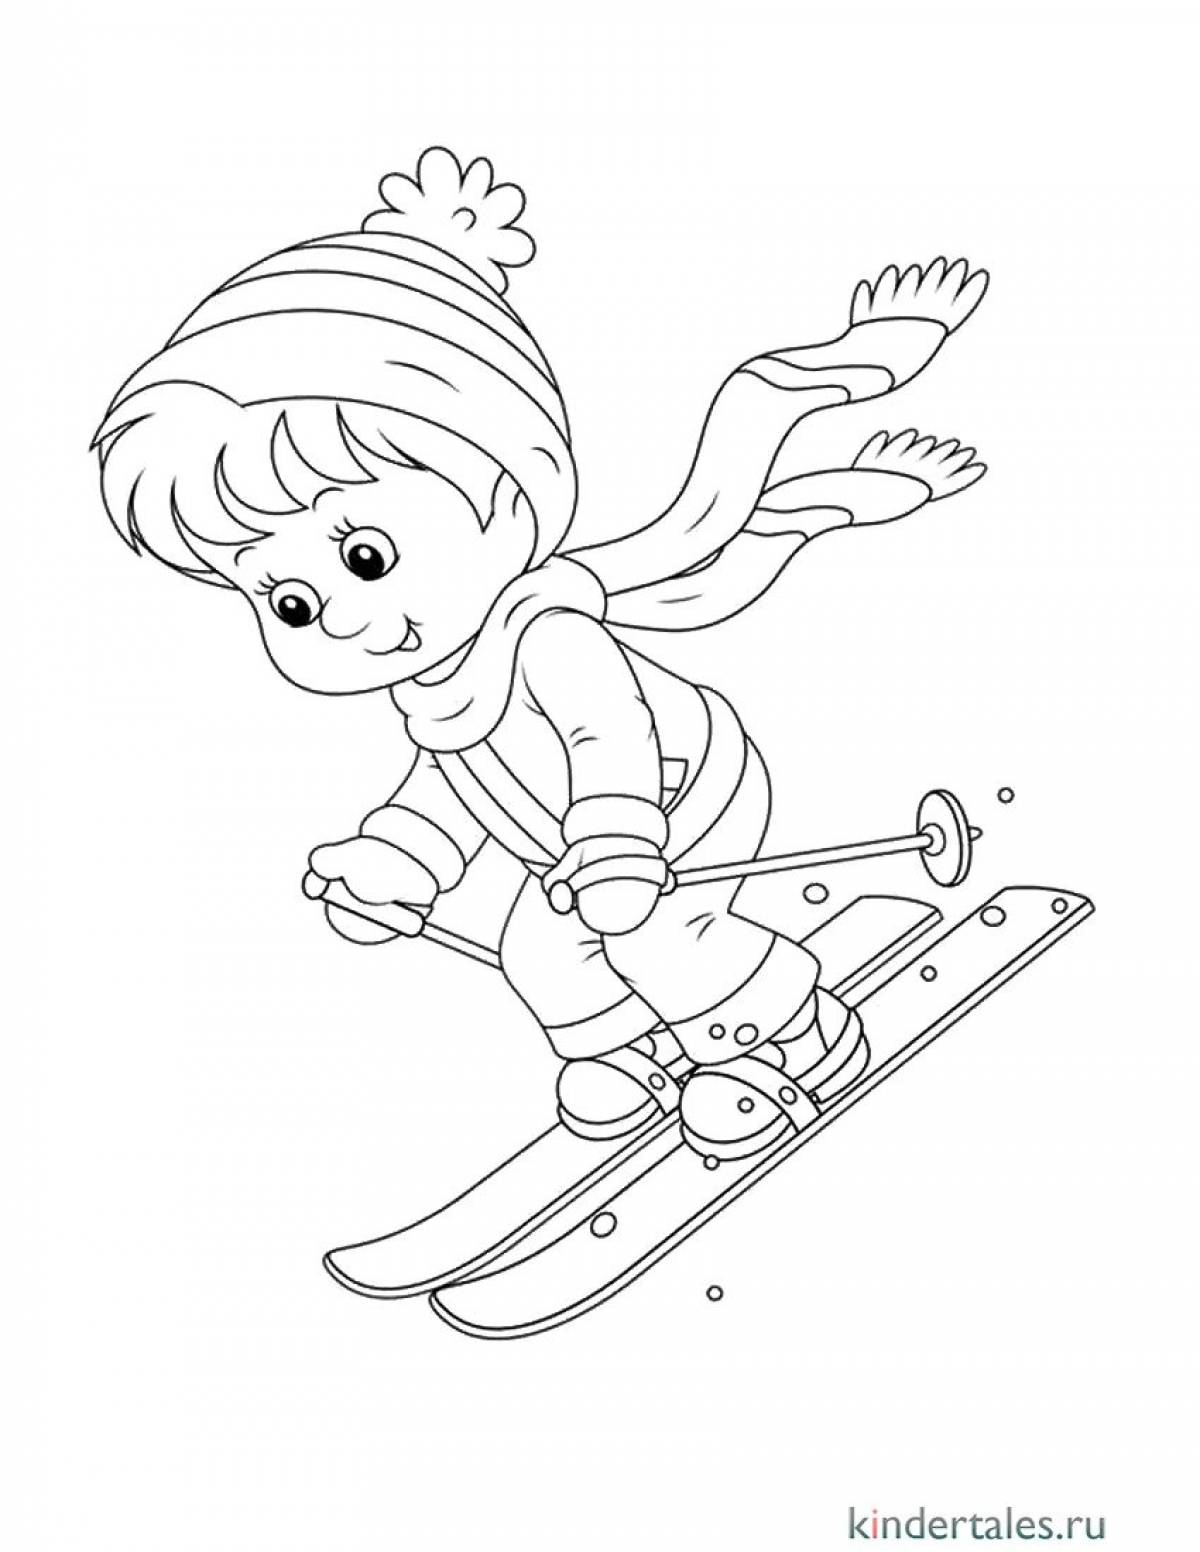 Coloring book irresistible boy on skis